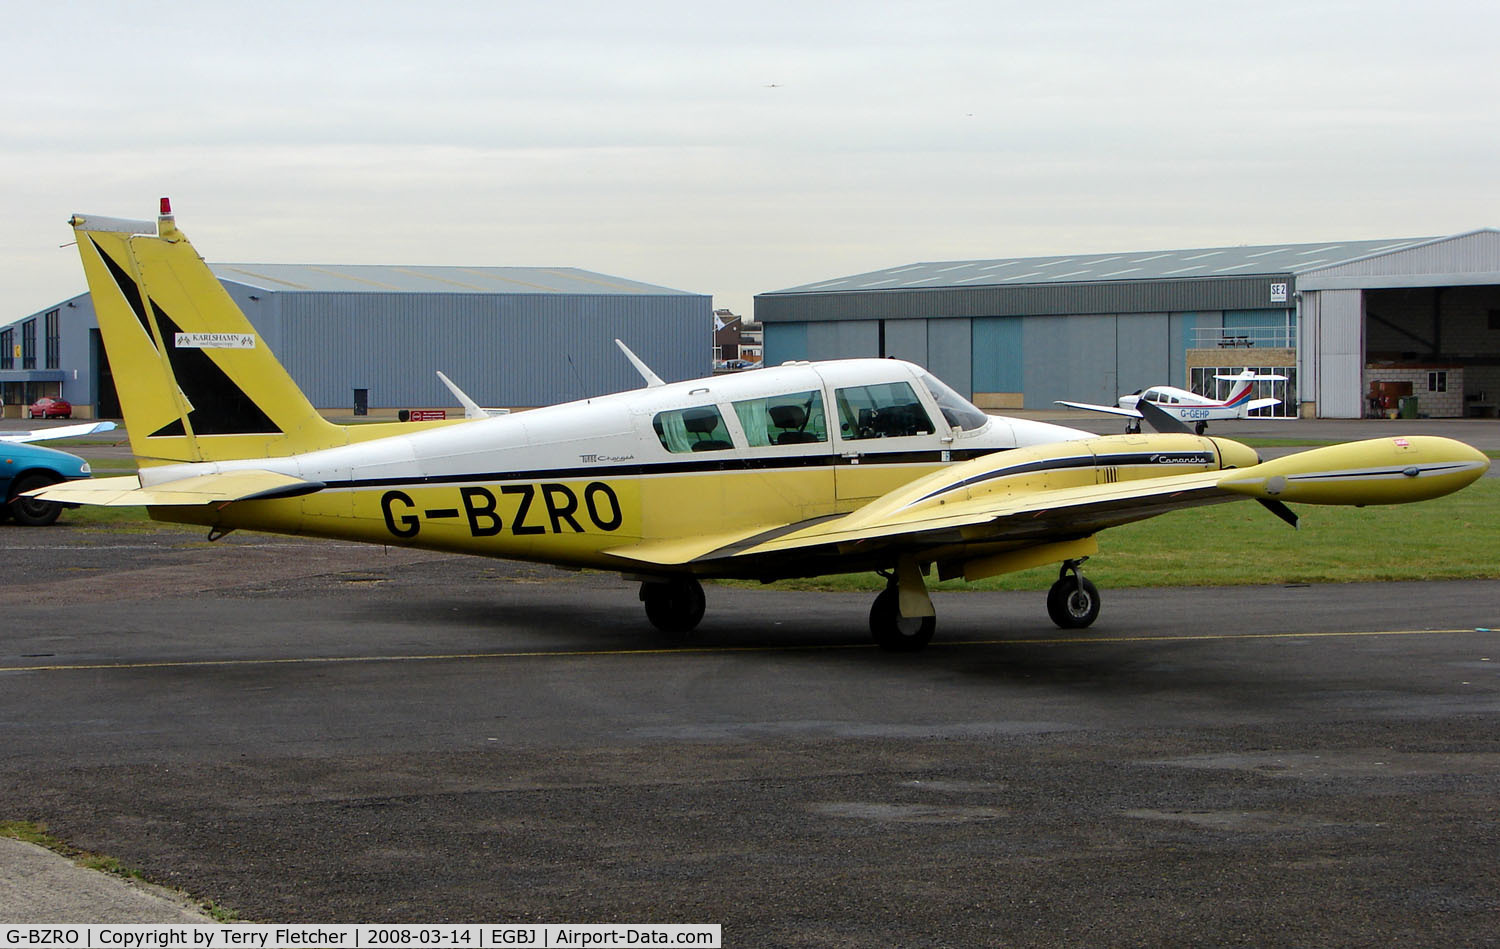 G-BZRO, 1969 Piper PA-30 Twin Comanche Twin Comanche C/N 30-1923, Resident aircraft based at Gloucestershire Airport